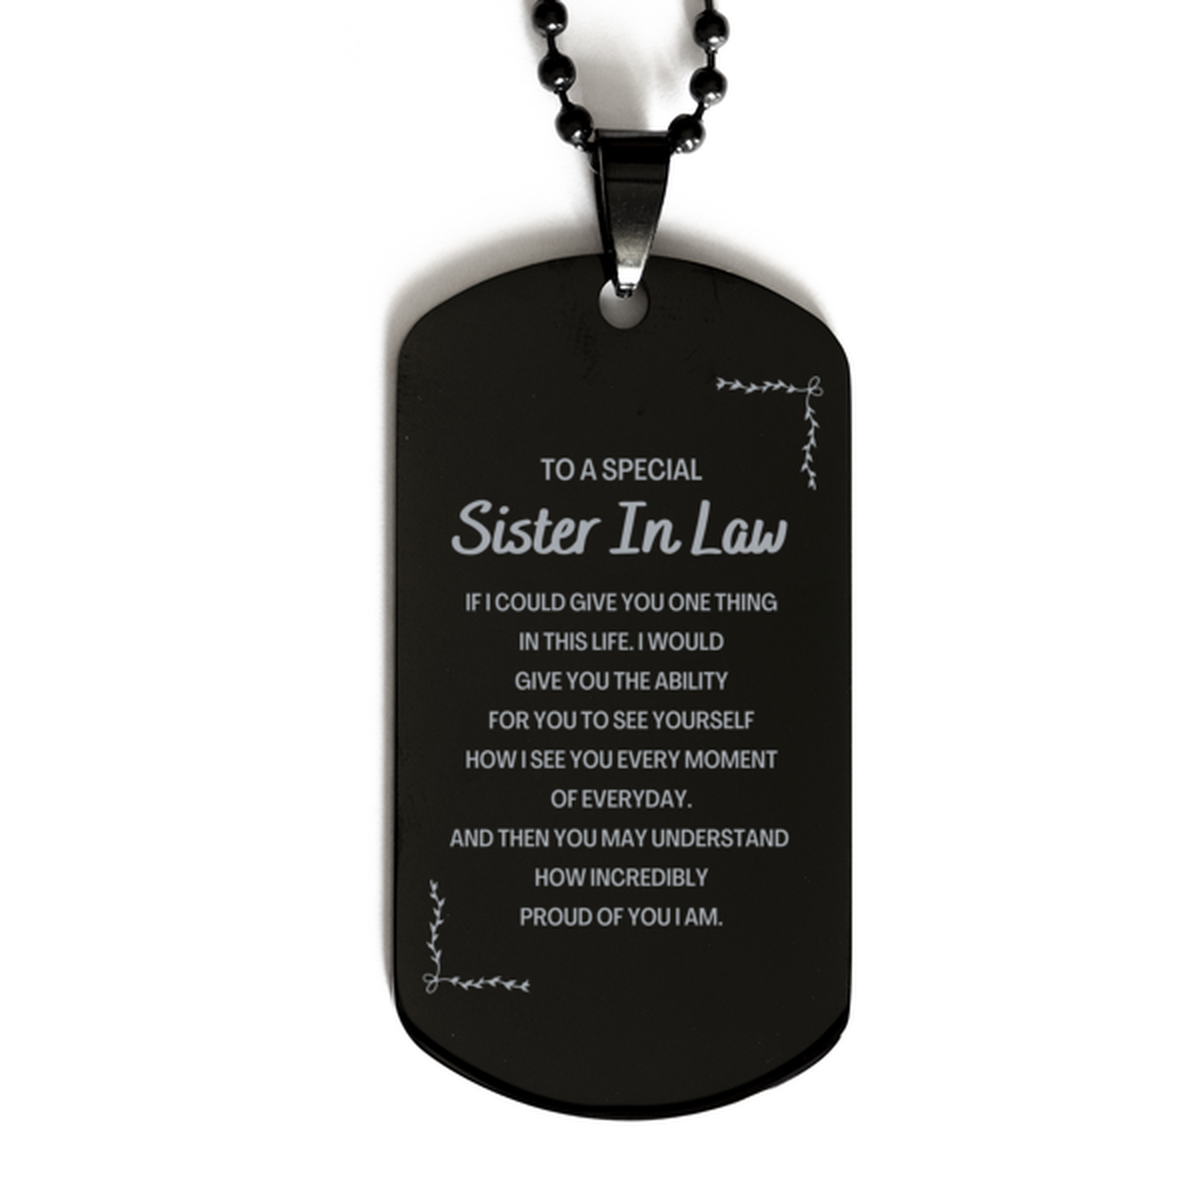 To My Sister In Law Black Dog Tag, Gifts For Sister In Law Engraved, Inspirational Gifts for Christmas Birthday, Epic Gifts for Sister In Law To A Special Sister In Law how incredibly proud of you I am